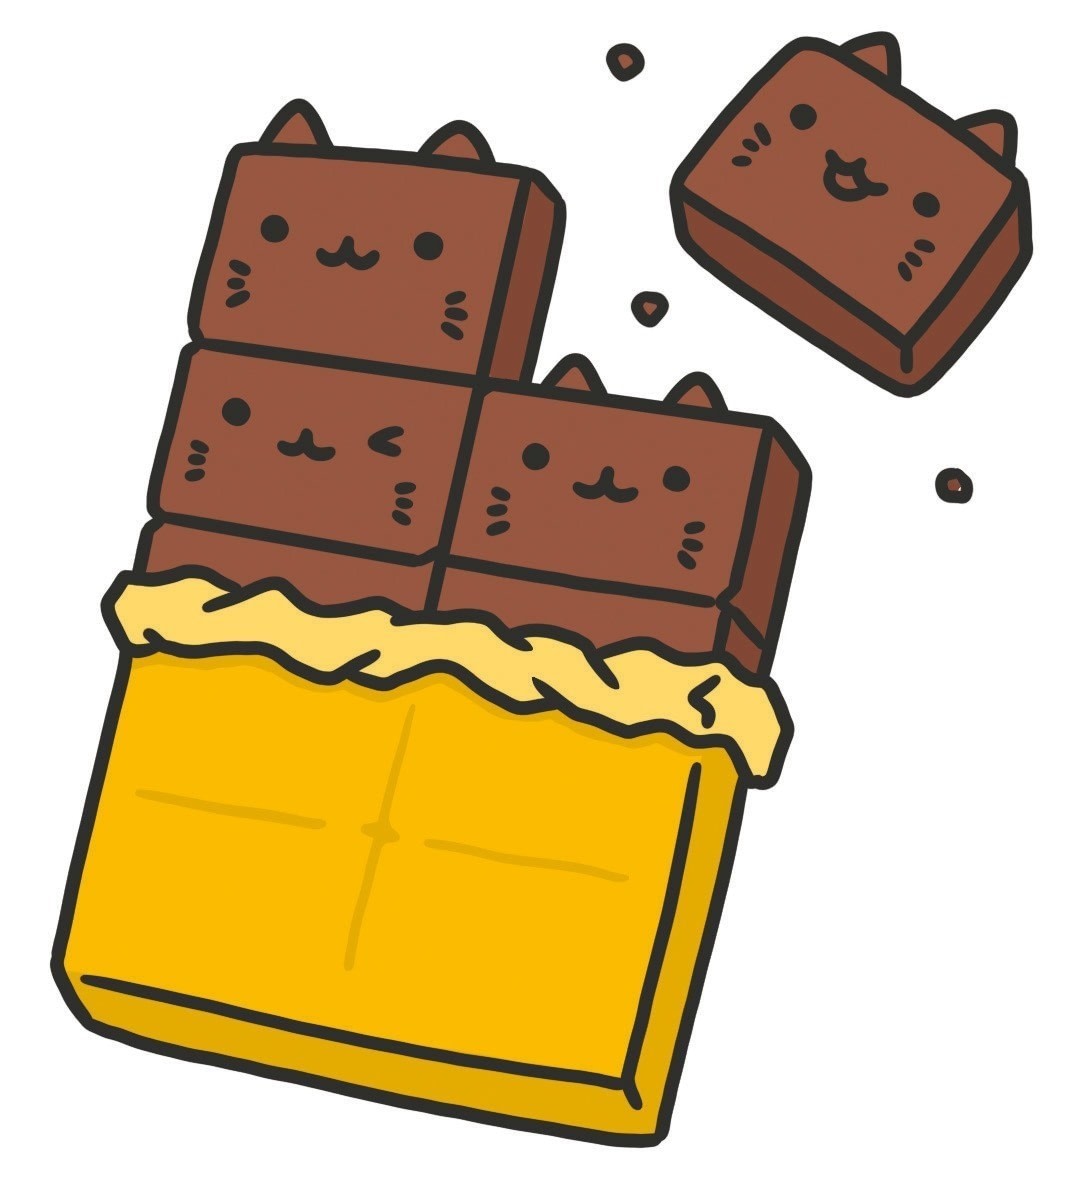 Chocolates icons, choco candies and sweets sketch - Stock Illustration  [60614661] - PIXTA